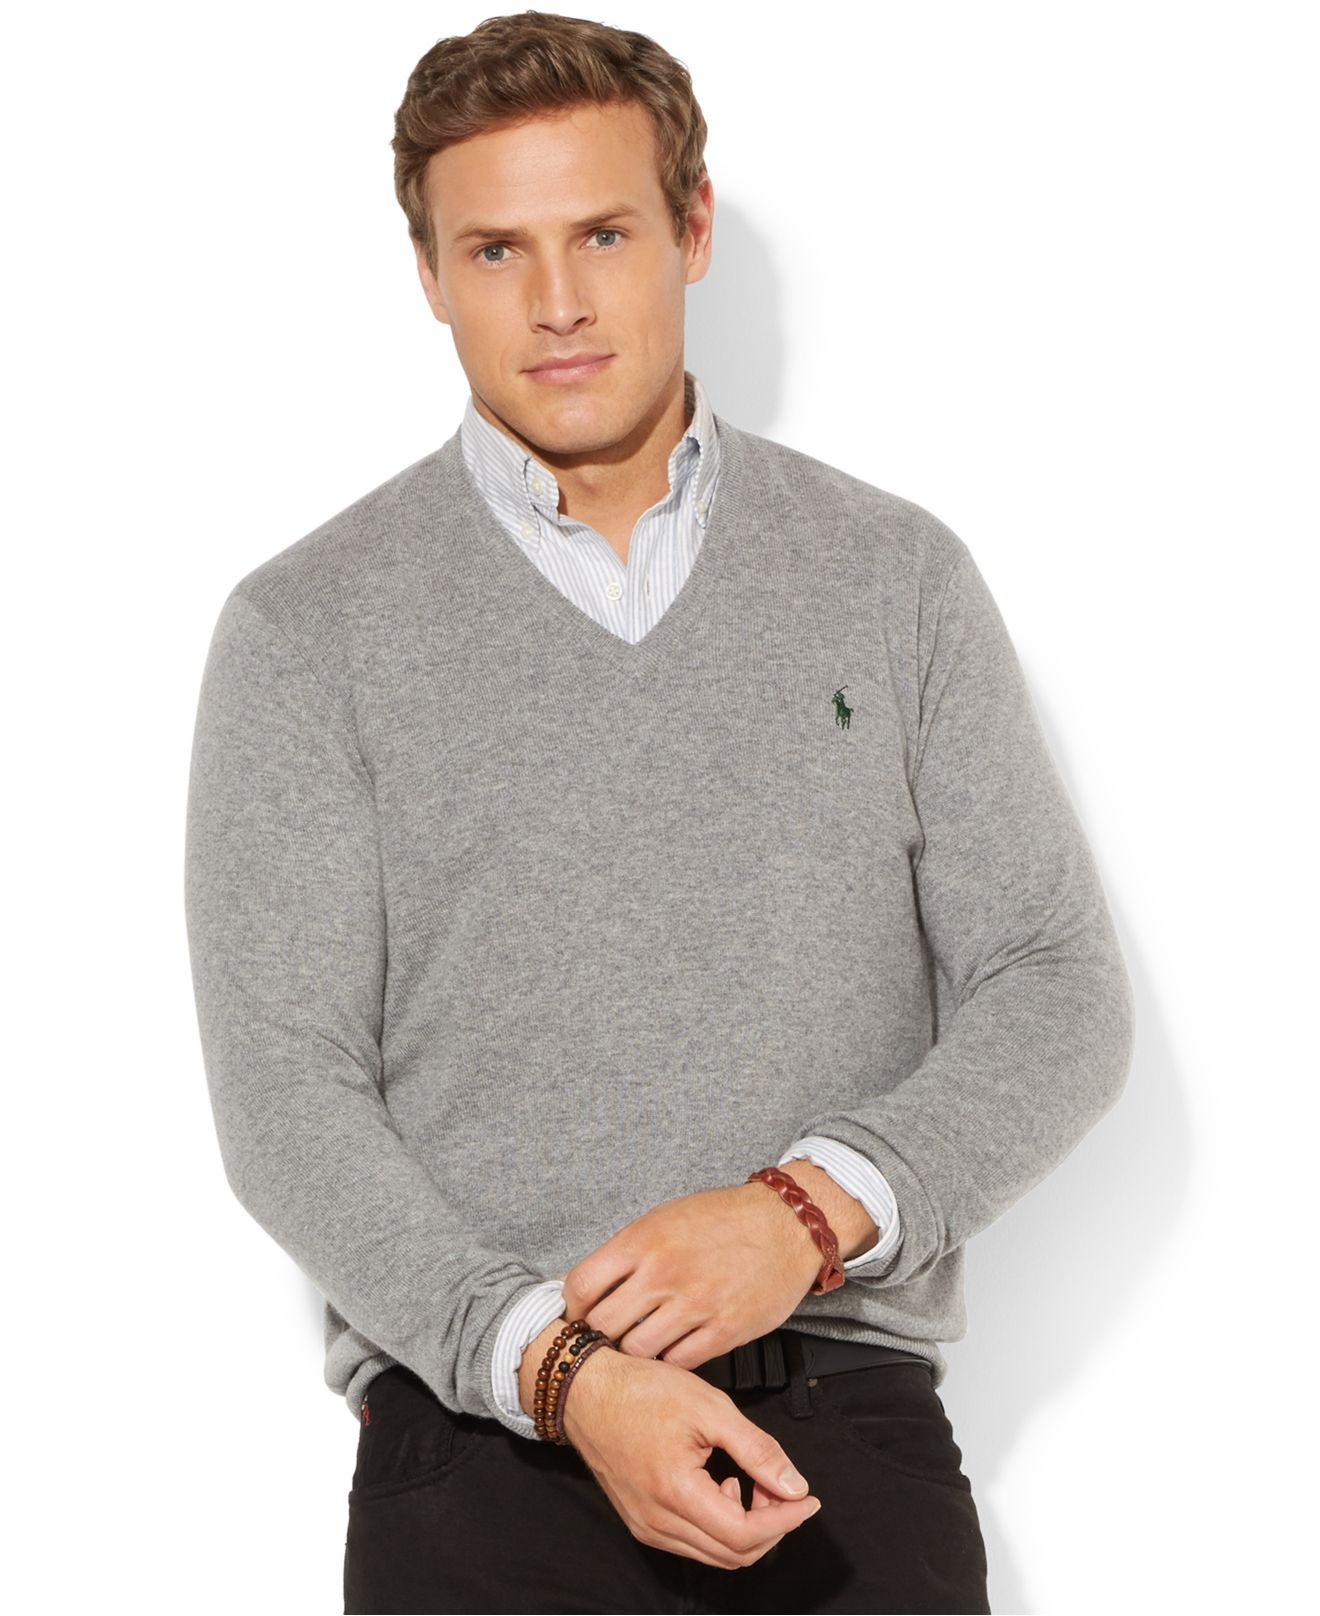 Lyst - Polo Ralph Lauren Big And Tall Merino Wool V-Neck Sweater in ...